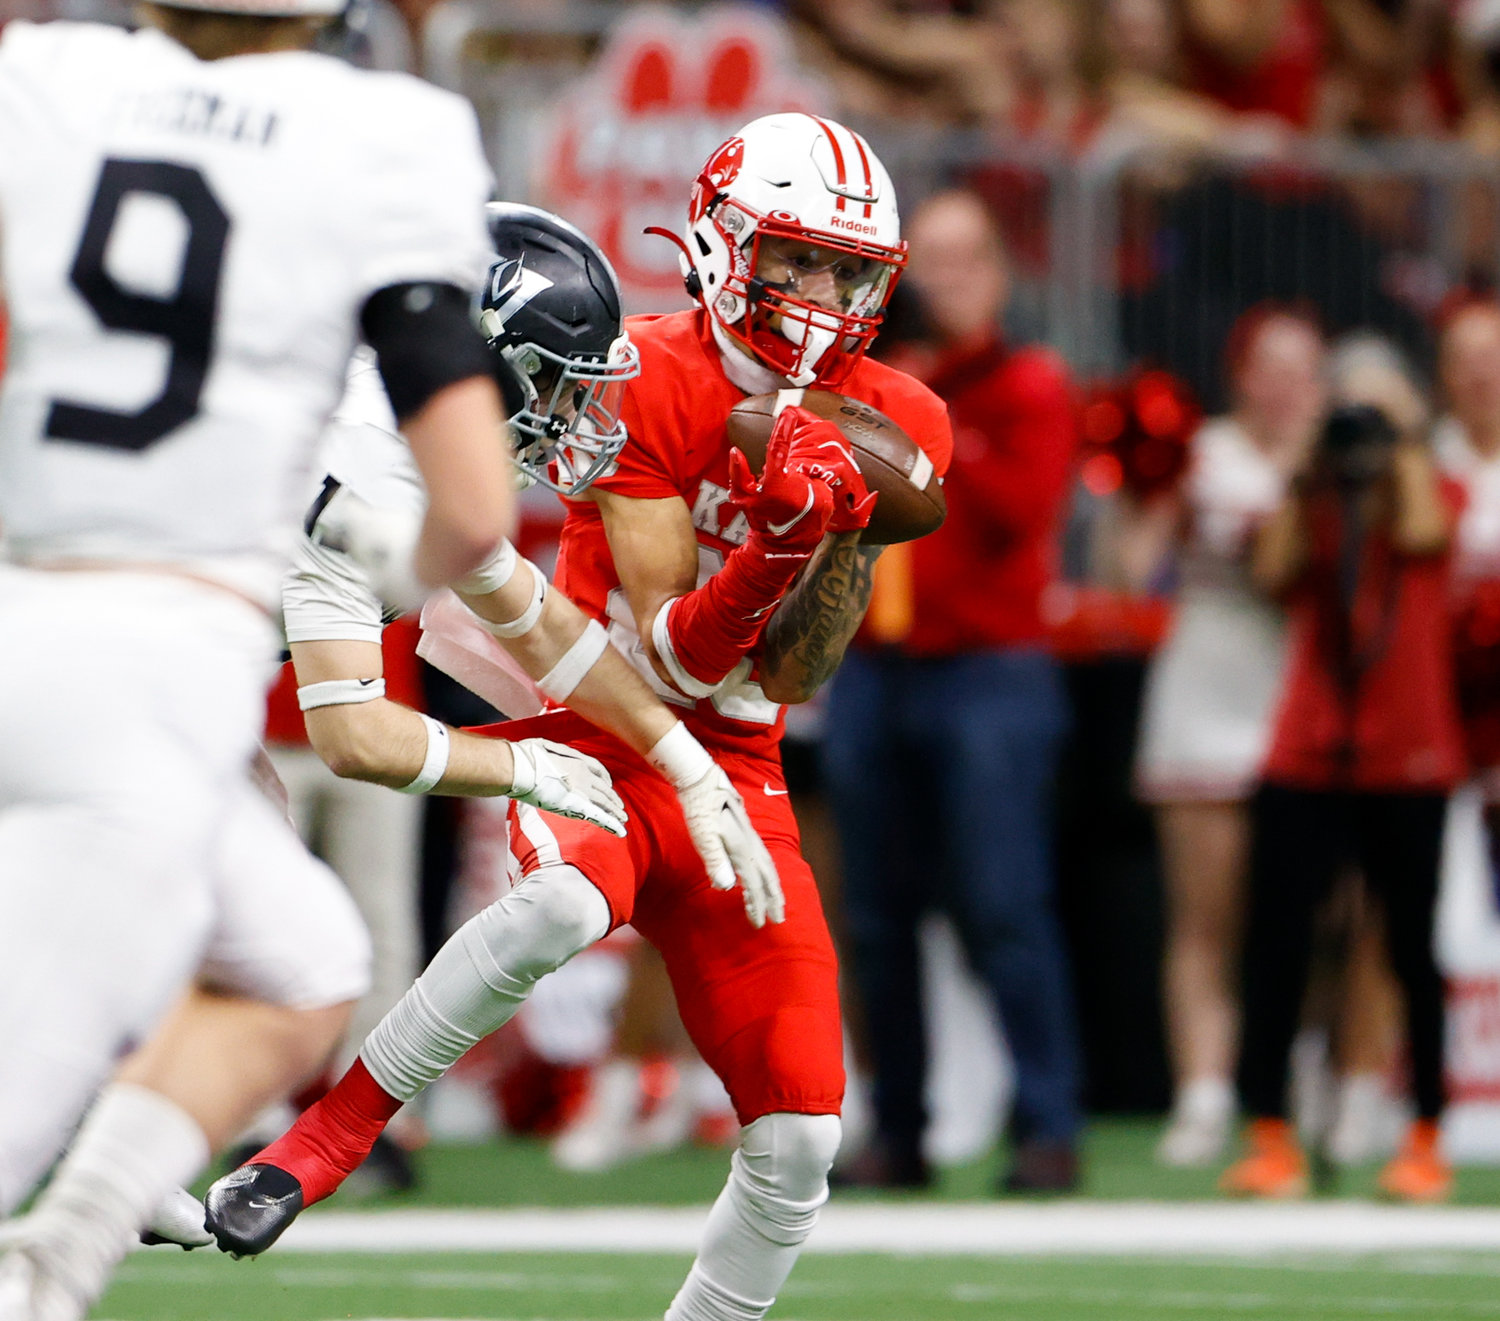 Katy wide receiver Micah Koenig (20) makes a catch behind the Vandegrift defense during the Class 6A-DII state semifinal football game between Katy and Vandegrift on Dec. 10, 2022 in San Antonio.